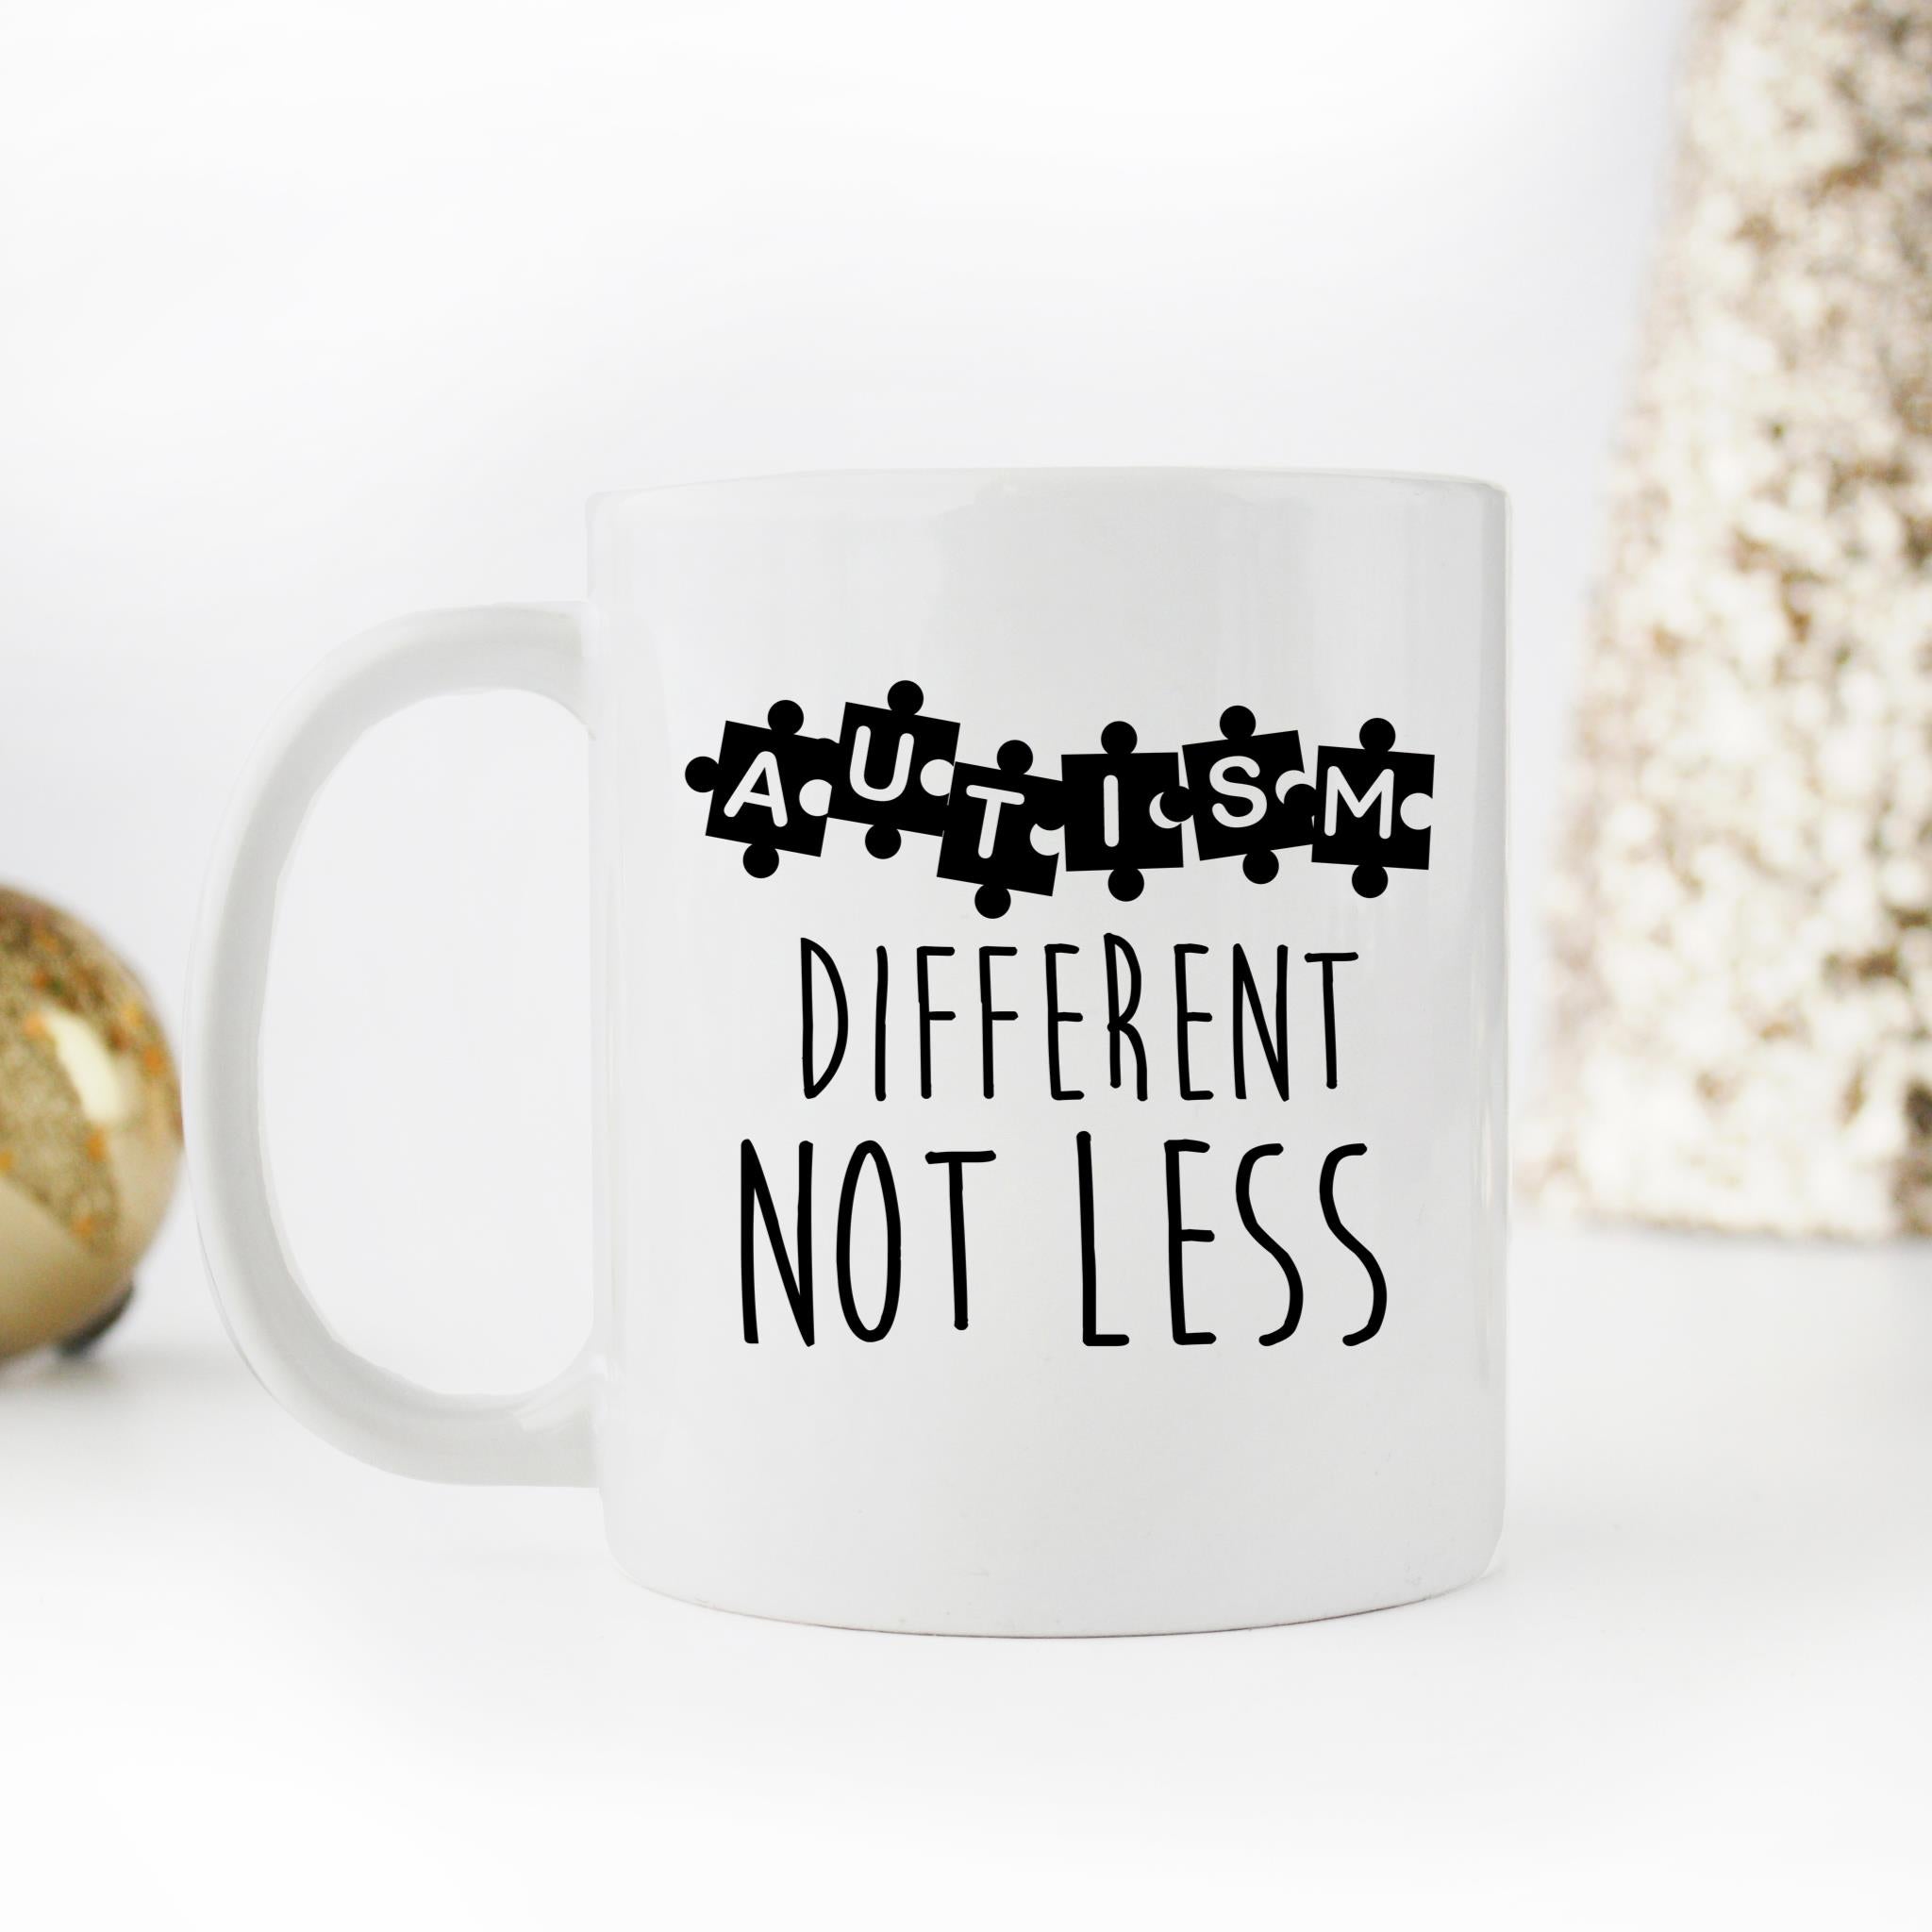 Skitongifts Funny Ceramic Novelty Coffee Mug Autism Different Not Less Puzzle Awareness yLmnHWd